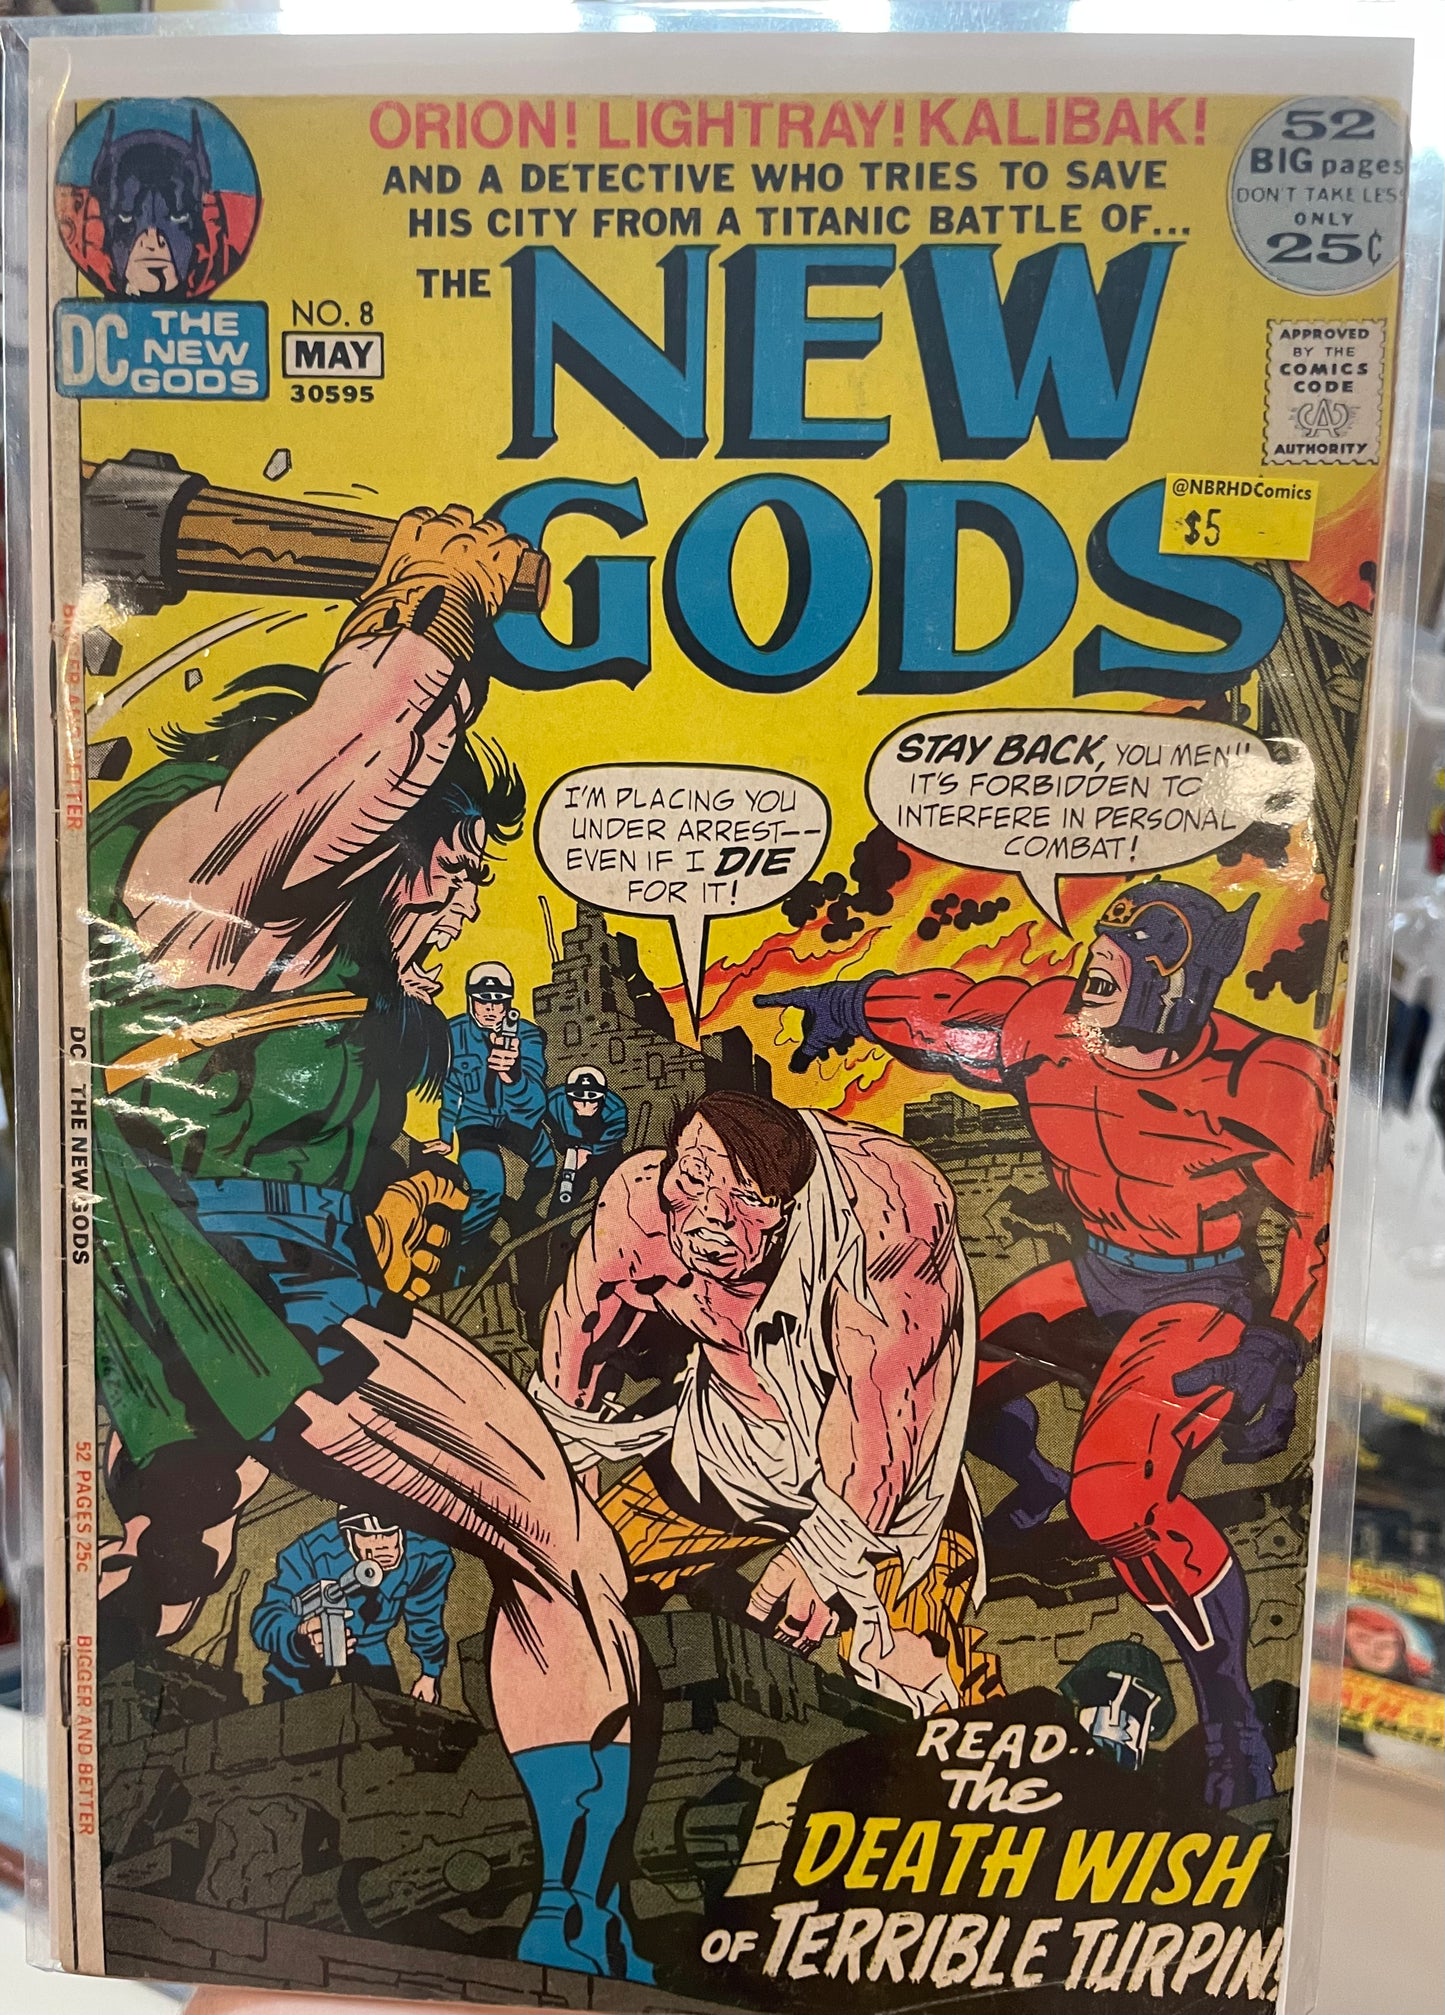 Orion of the New Gods #52